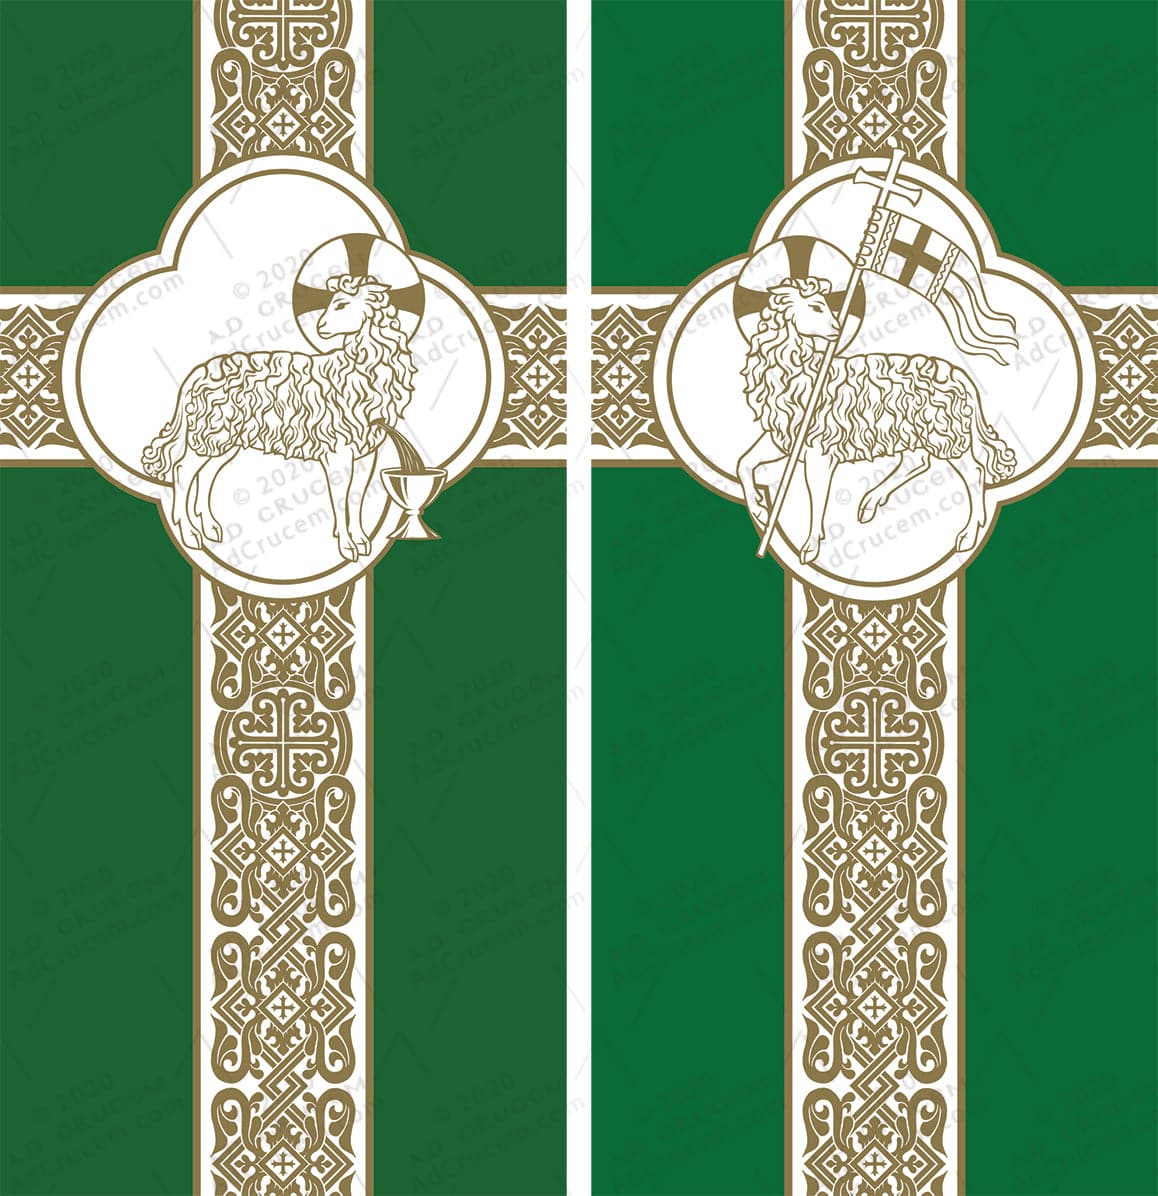 Ad Crucem Agnus Dei Ordinary Time Banners Set of Two